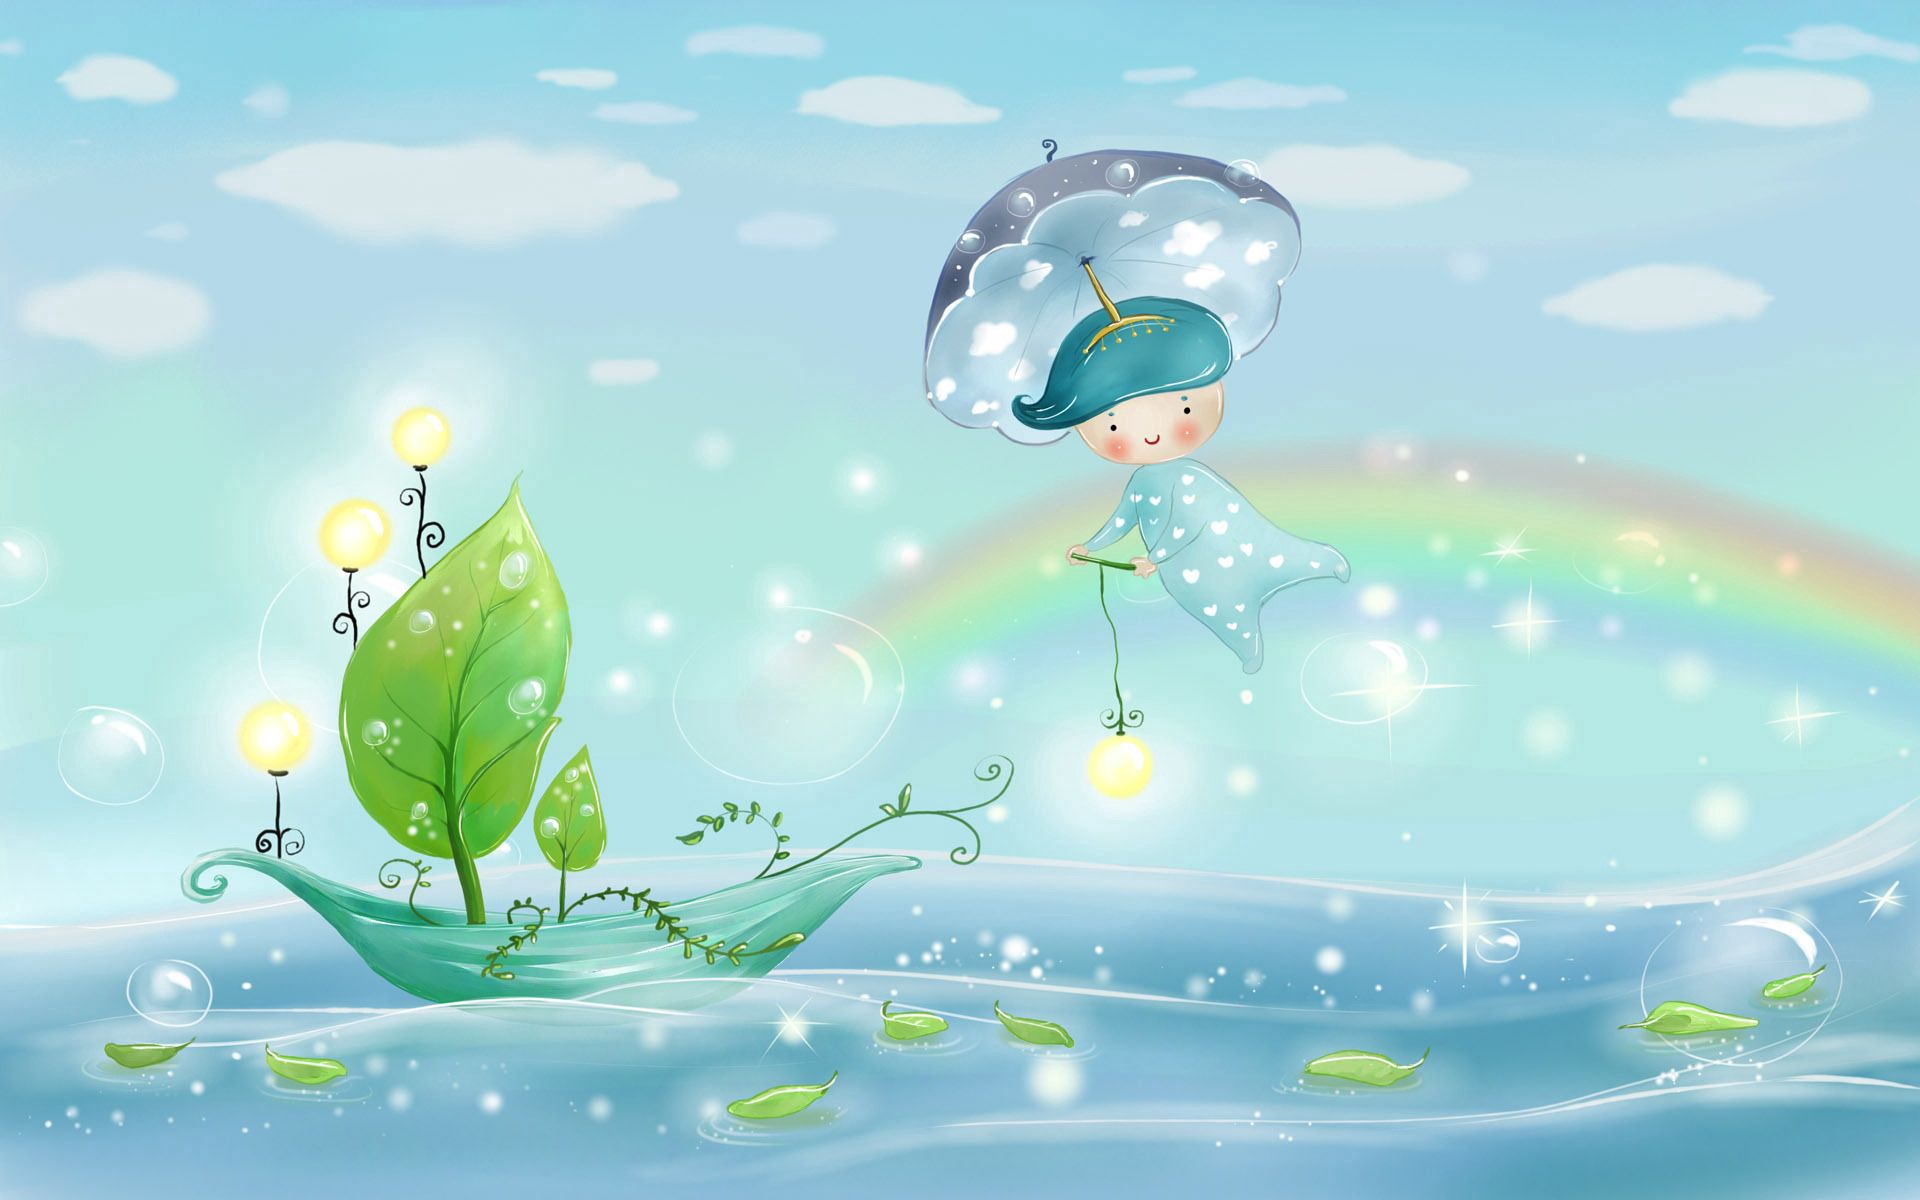 picture, vector, boat, lanterns, nature, water, sky, leaves, rain, sea, bubbles, clouds, rainbow, lights, shine, light, drawing, sail, umbrella, boy, weather 1080p